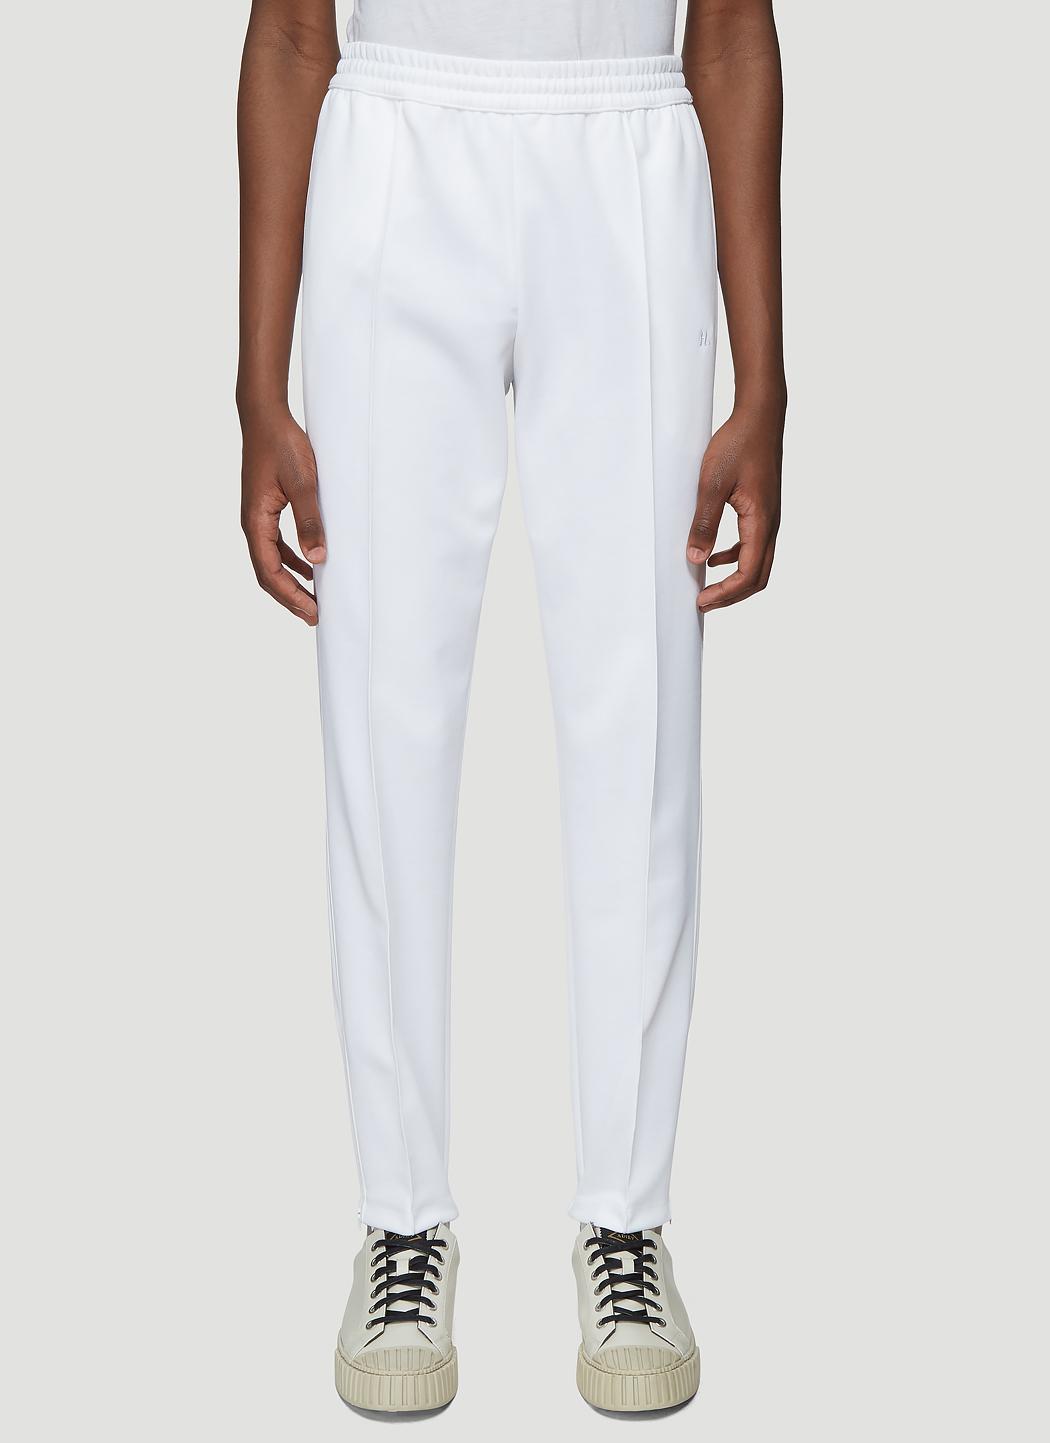 Helmut Lang Synthetic Stirrup Track Pants In White for Men - Lyst